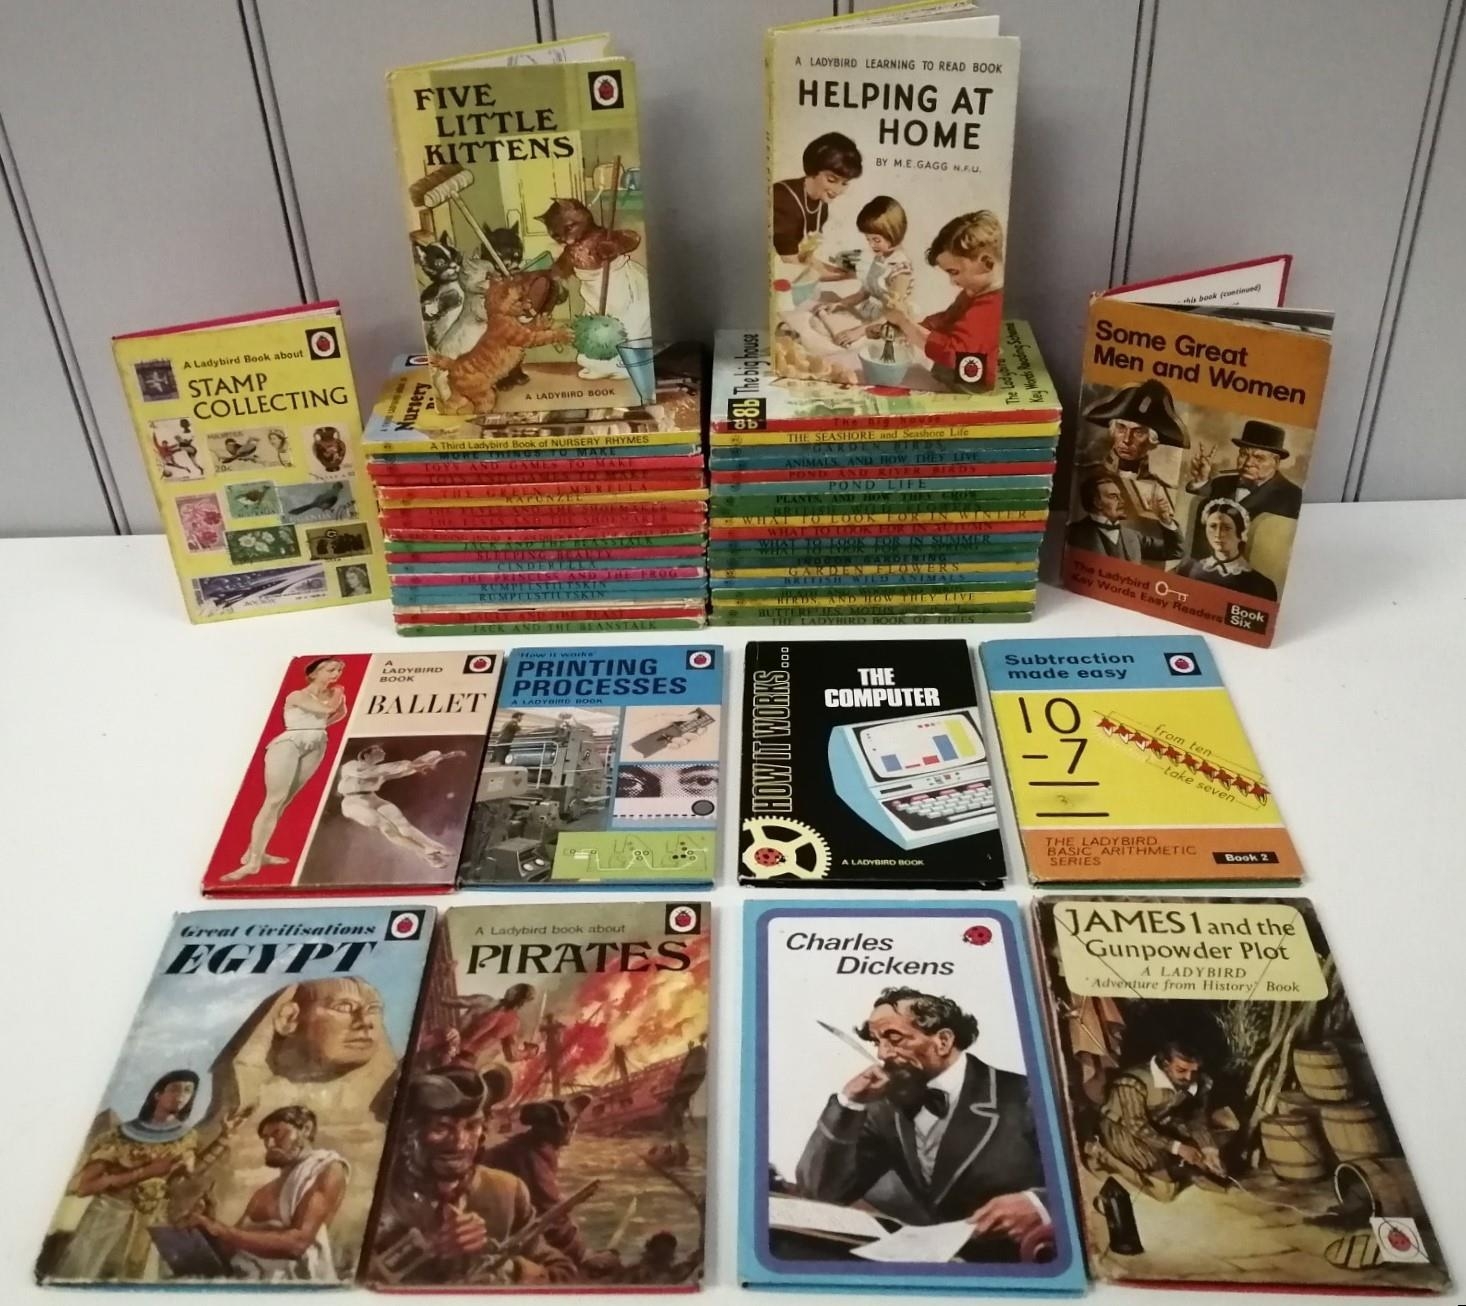 Vintage Ladybird Book Stamp Collecting 